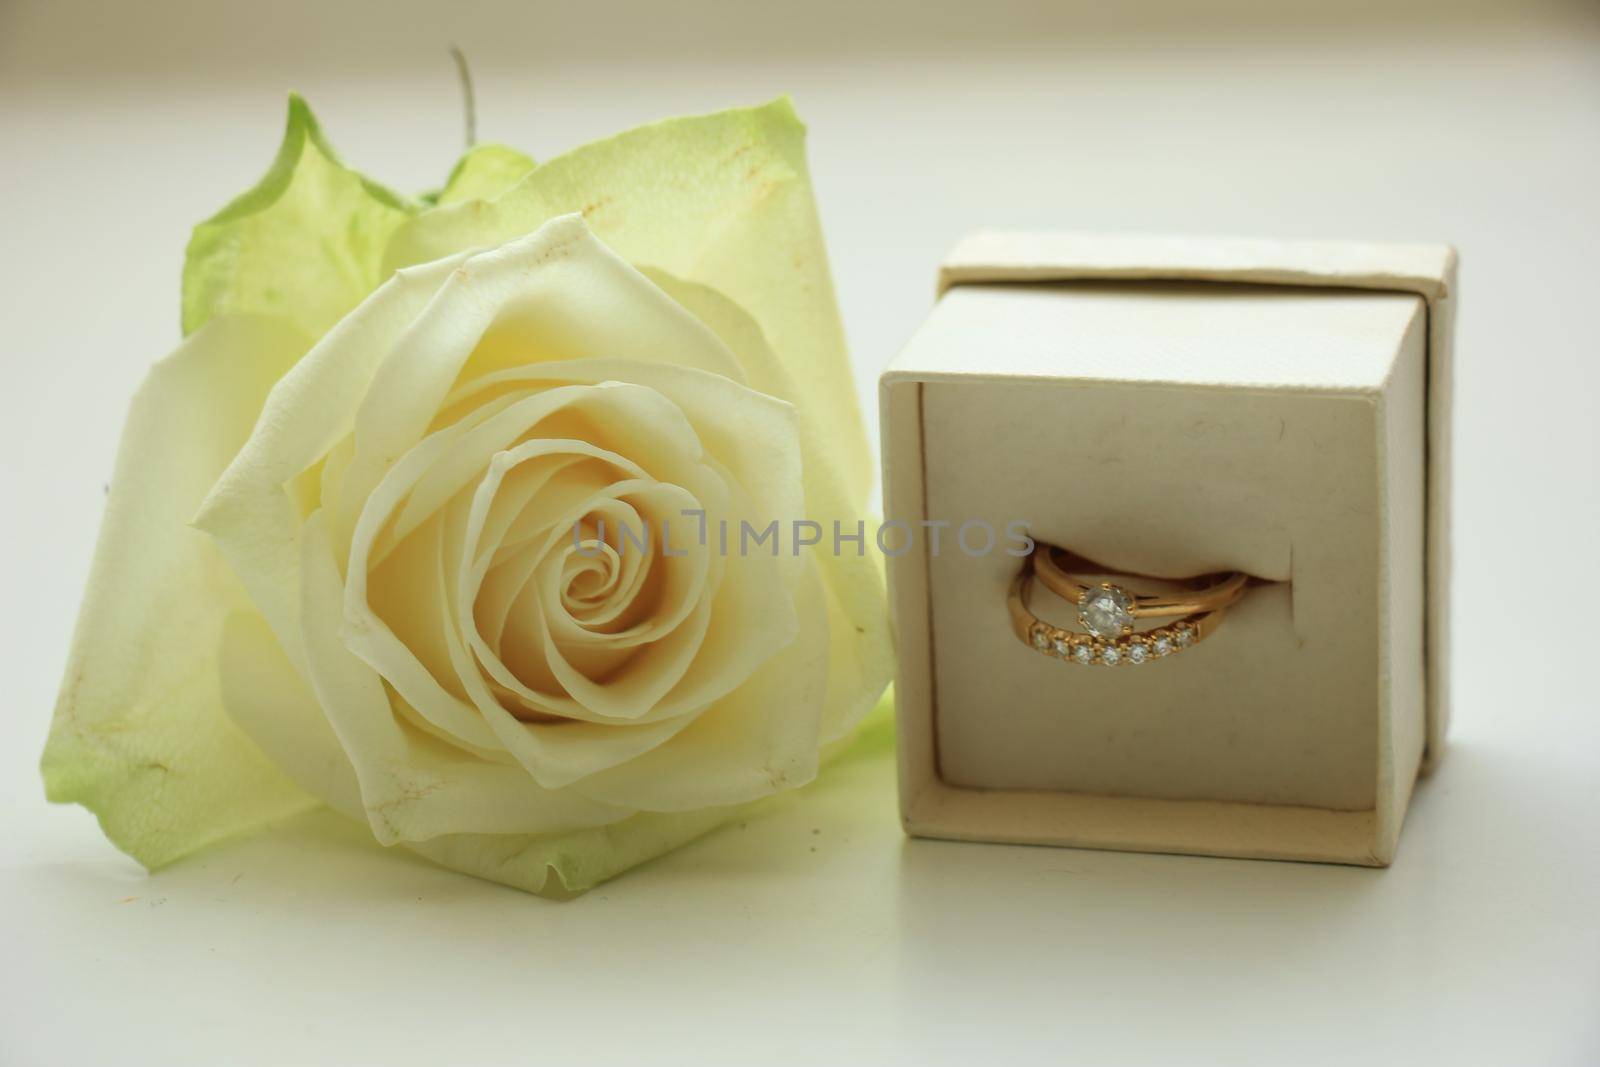 Engagement rings in box and white rose by studioportosabbia